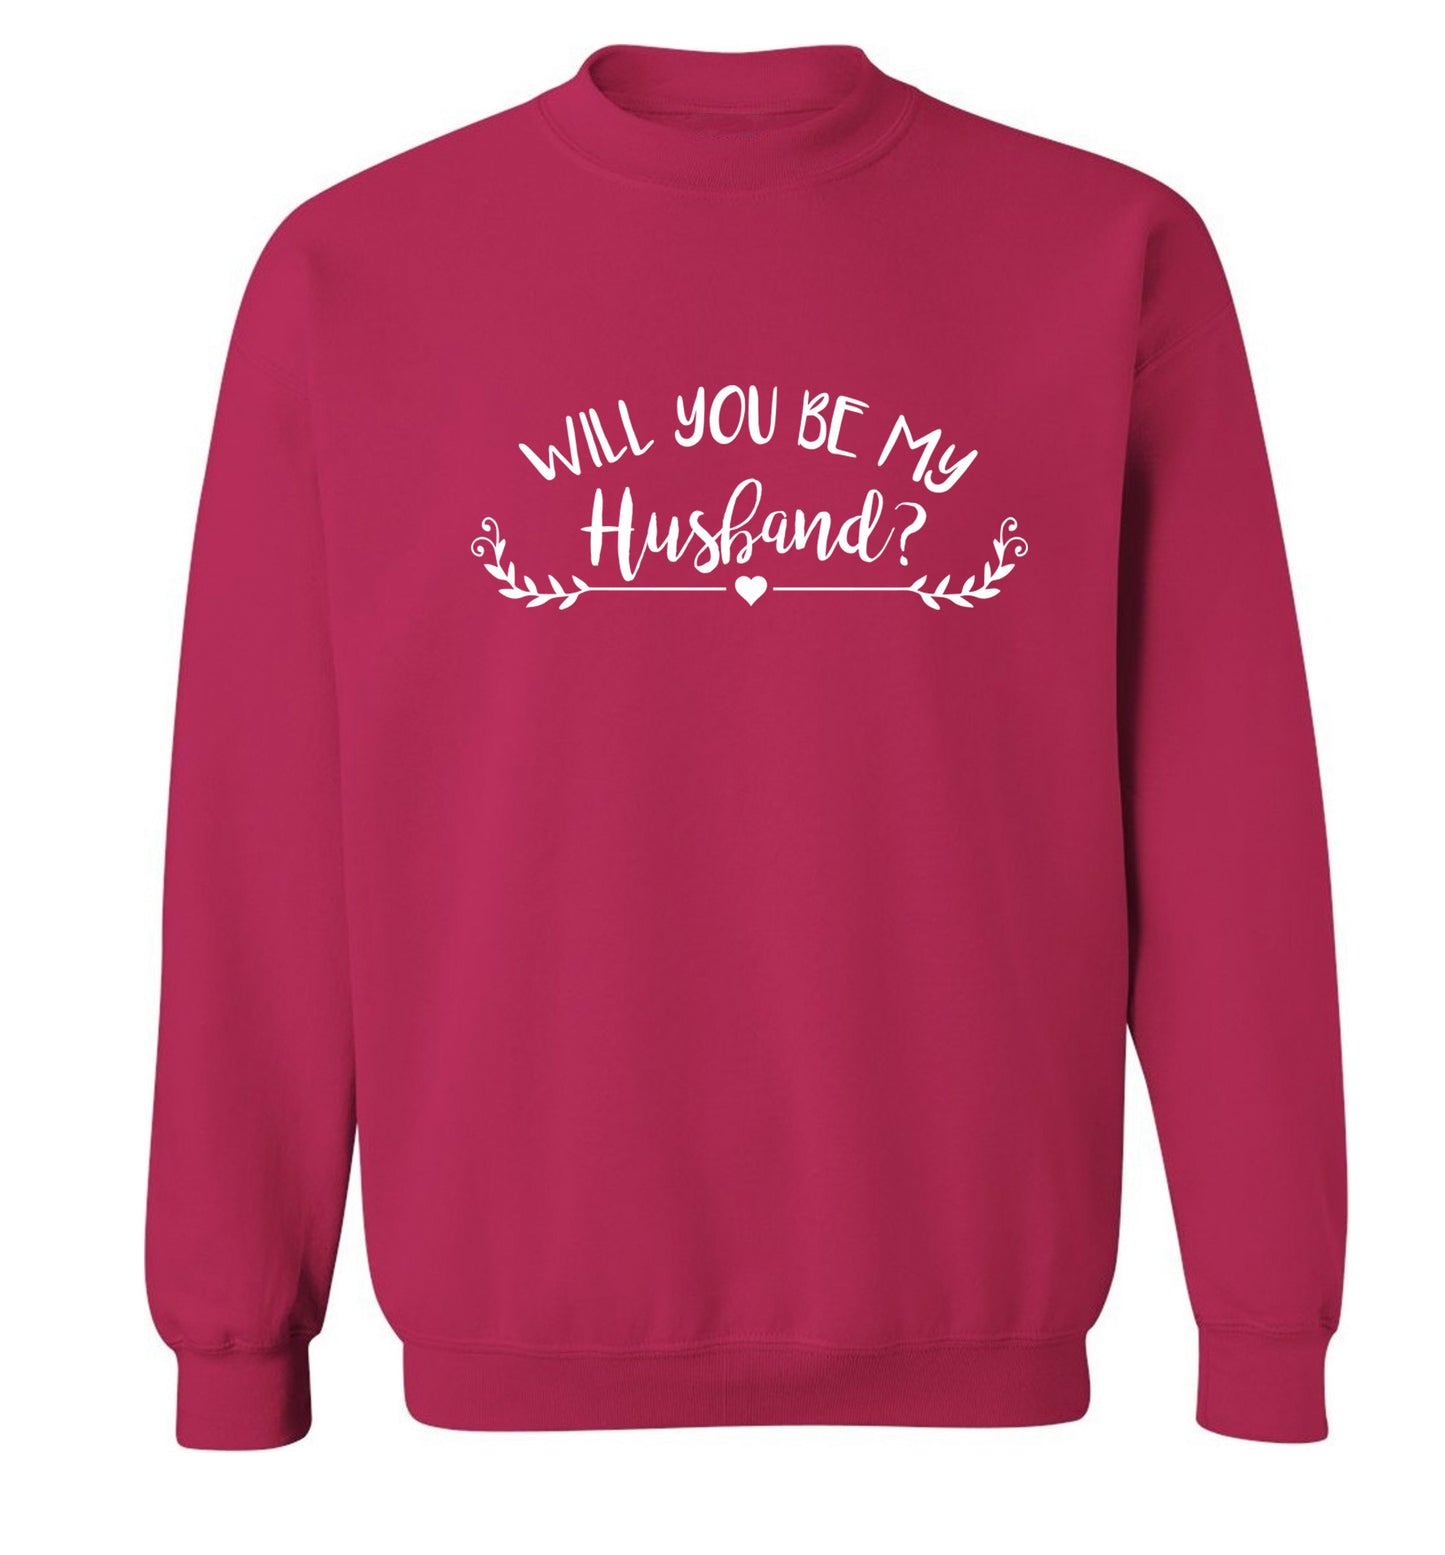 Will you be my husband? Adult's unisex pink Sweater 2XL